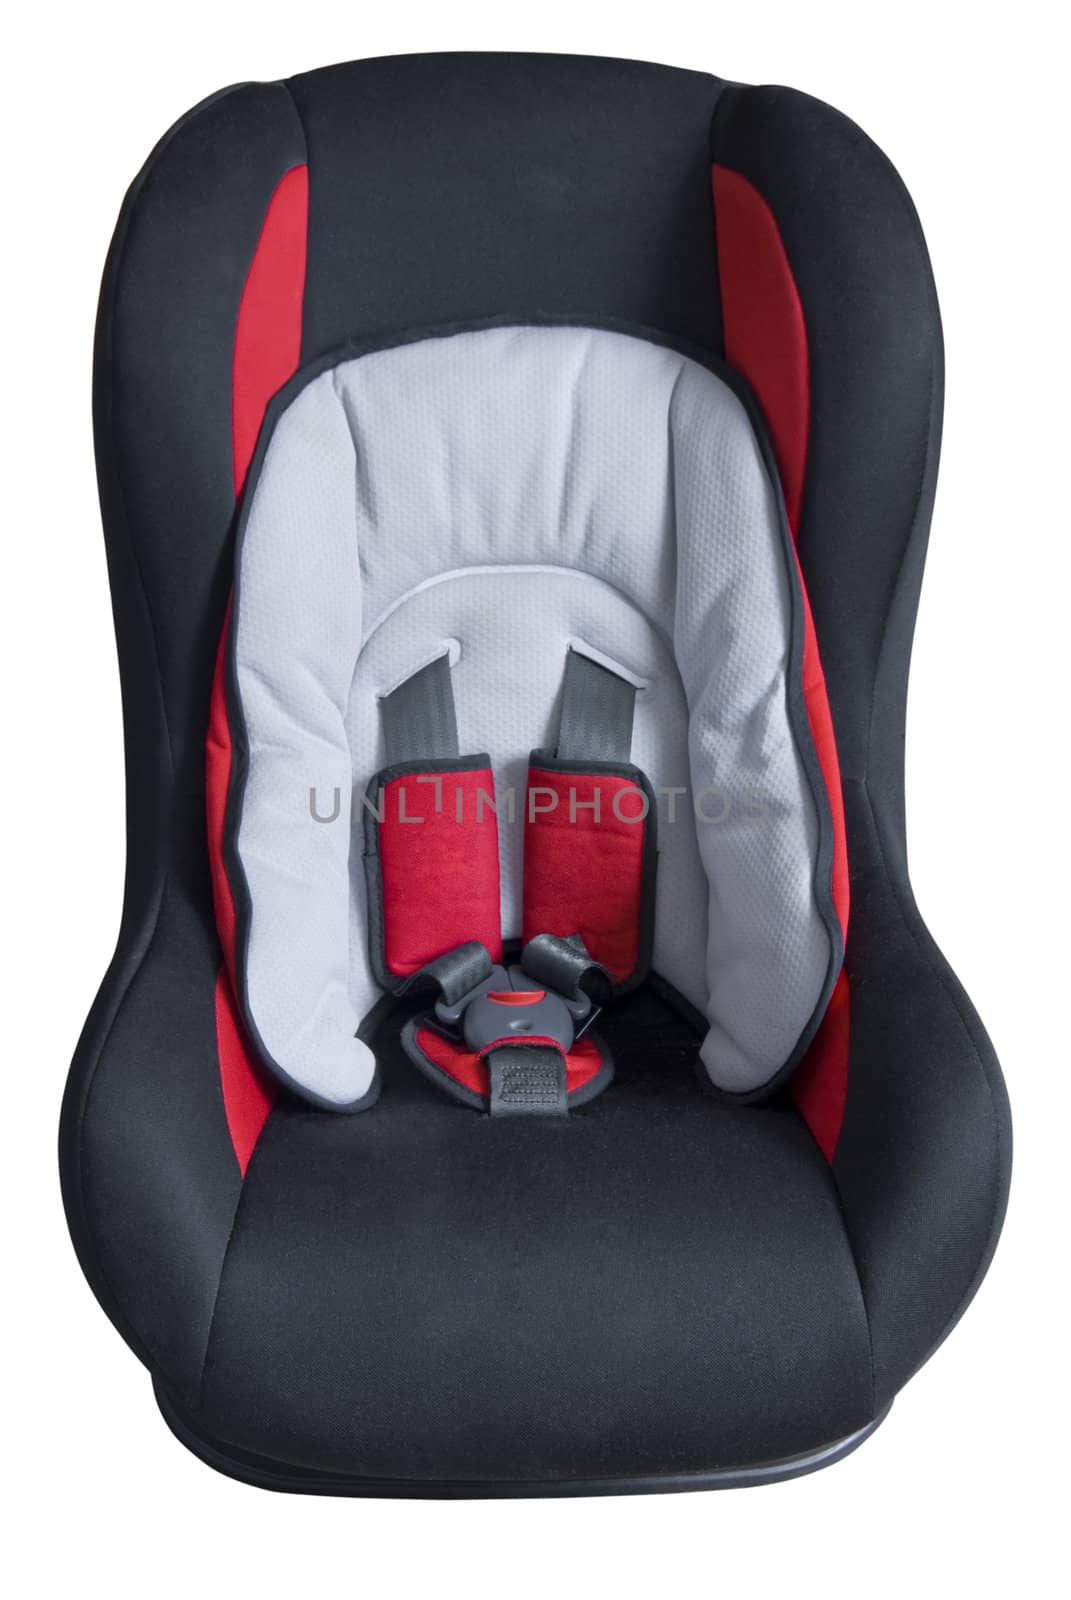 Dark children's car seat with red parts. Front view. Isolated on white background